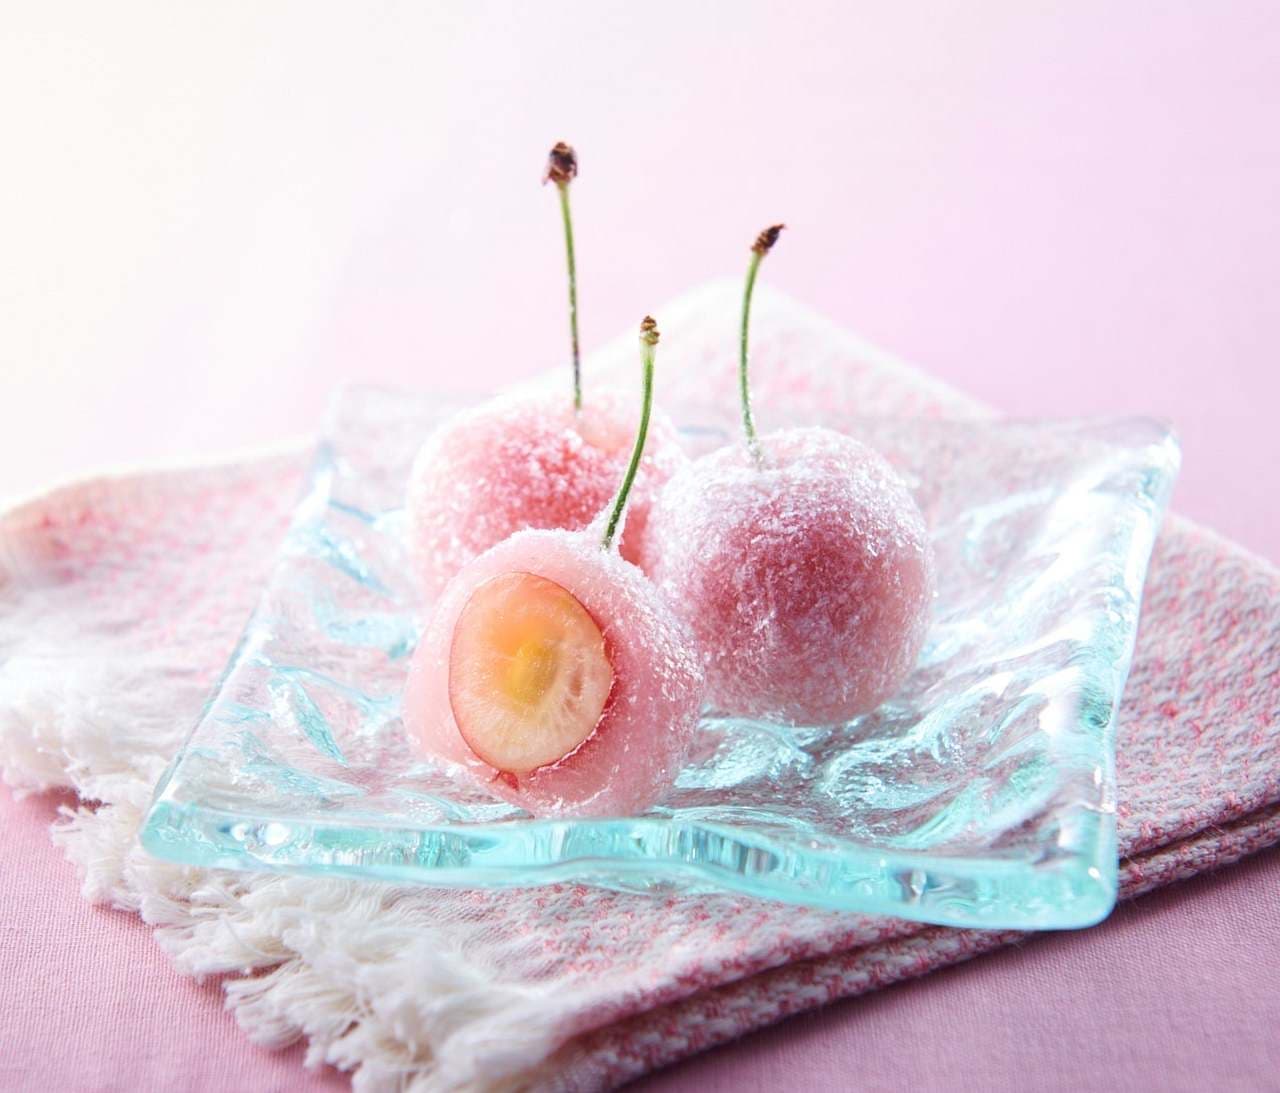 Chateraise "Cherry Mochi from Yamanashi Prefecture"